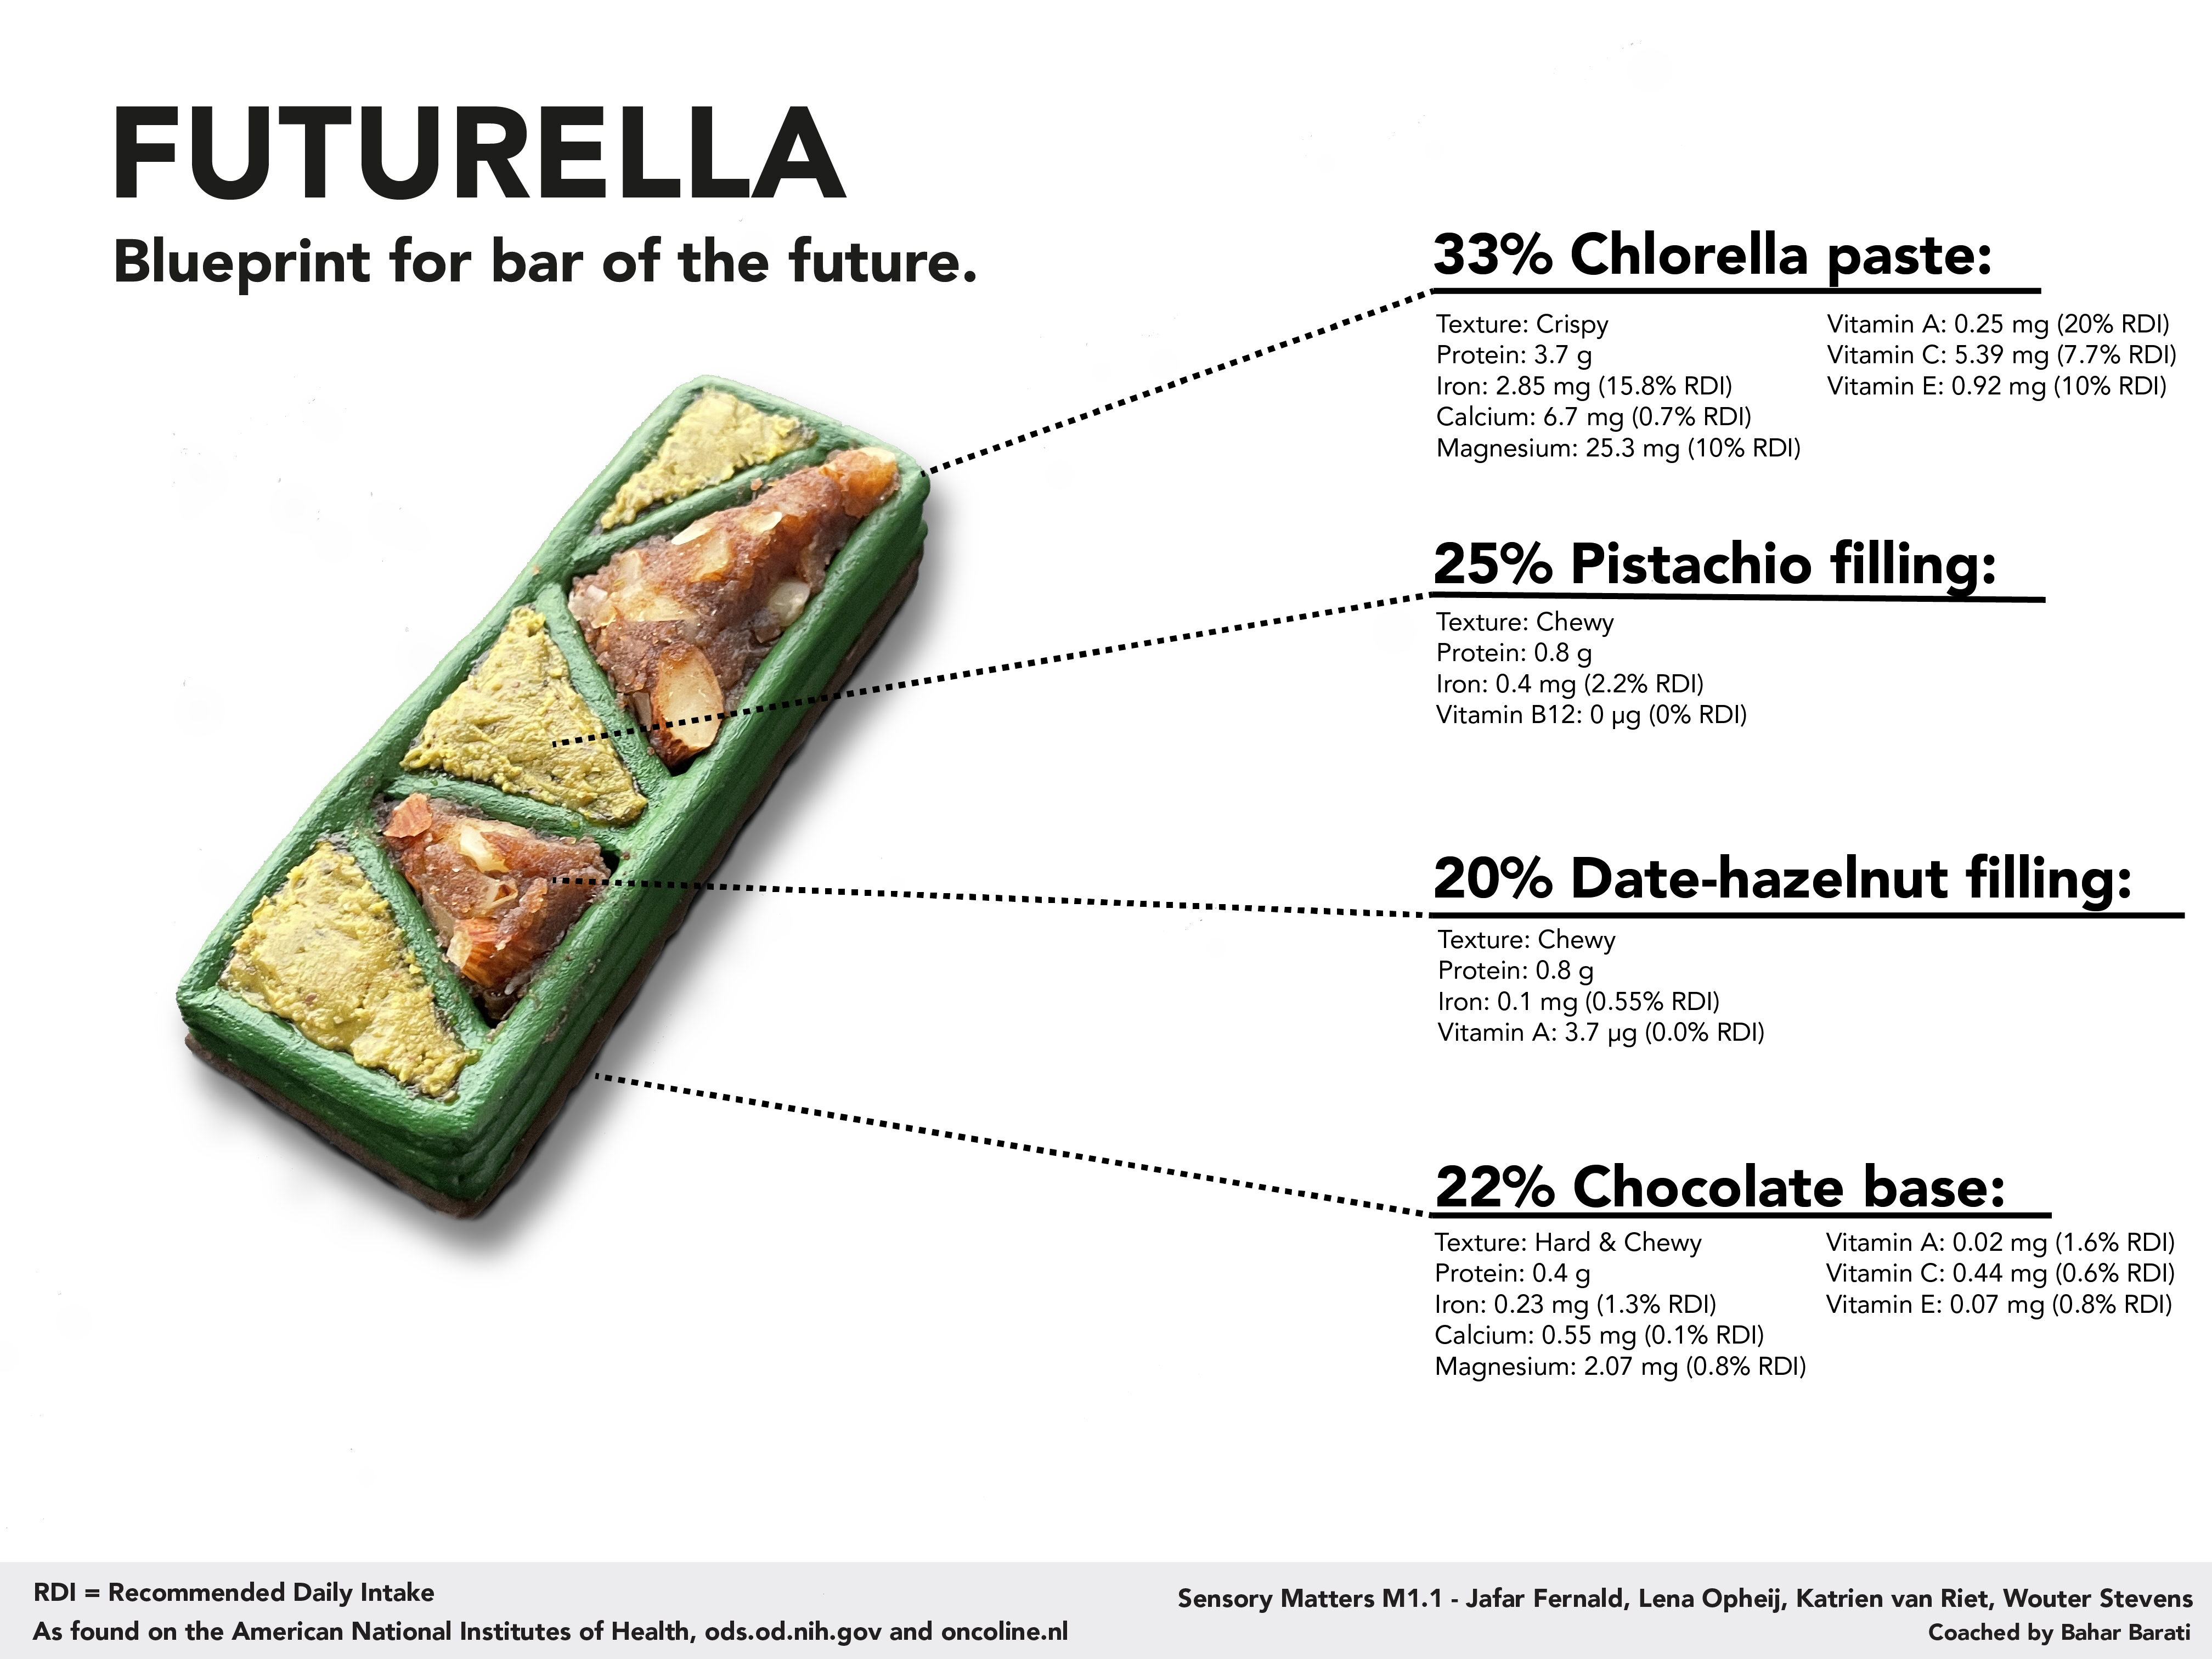 Future outlook for Chlorella super food in 2060